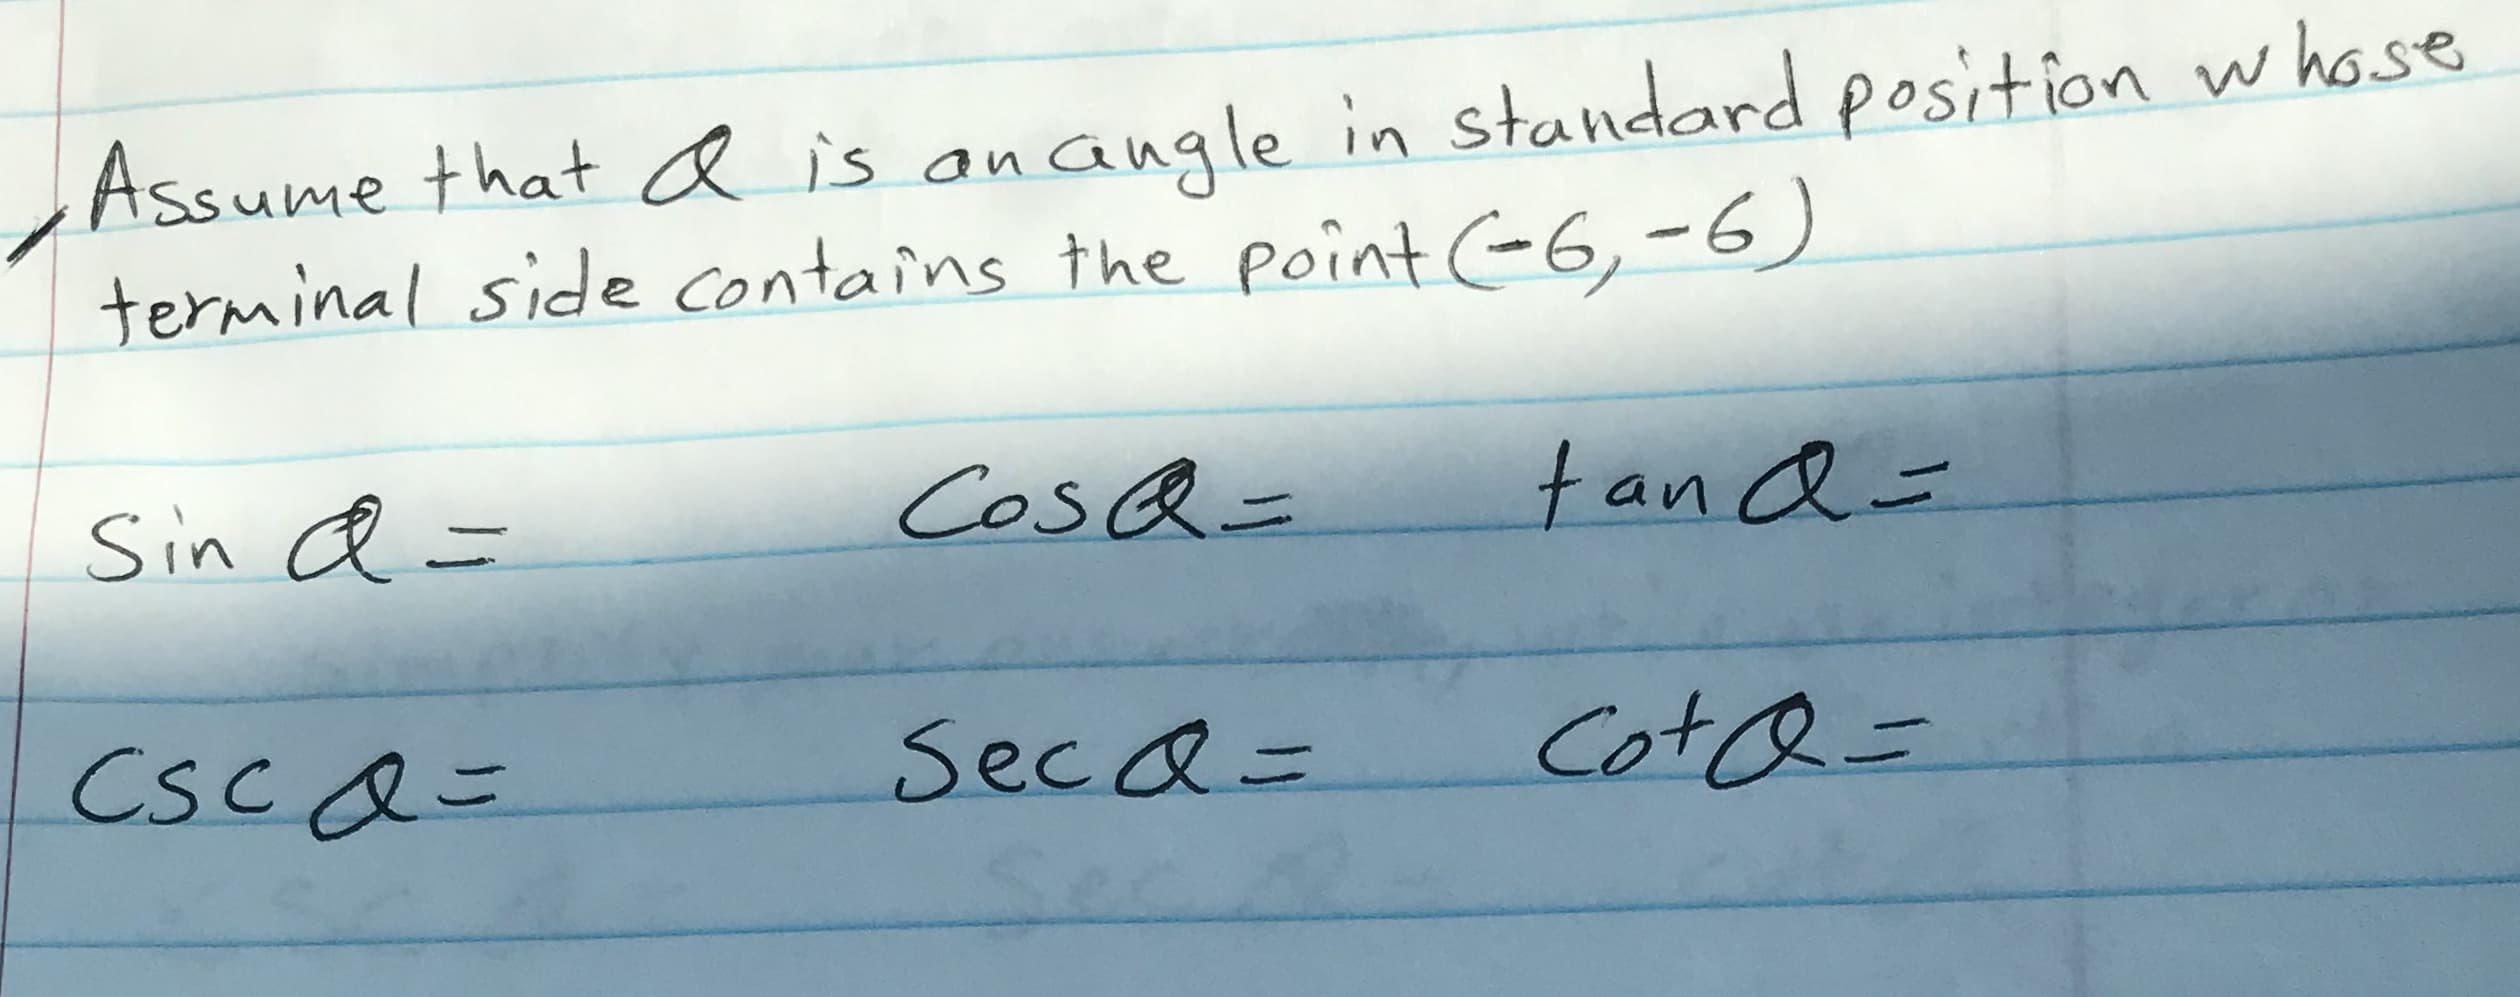 Assume that a is an angle in standard position whose
terminal side contains the point -6,-6)
Sin a =
CosQ=
tan a=
CSC Q=
SecaD
CotQ=
11
